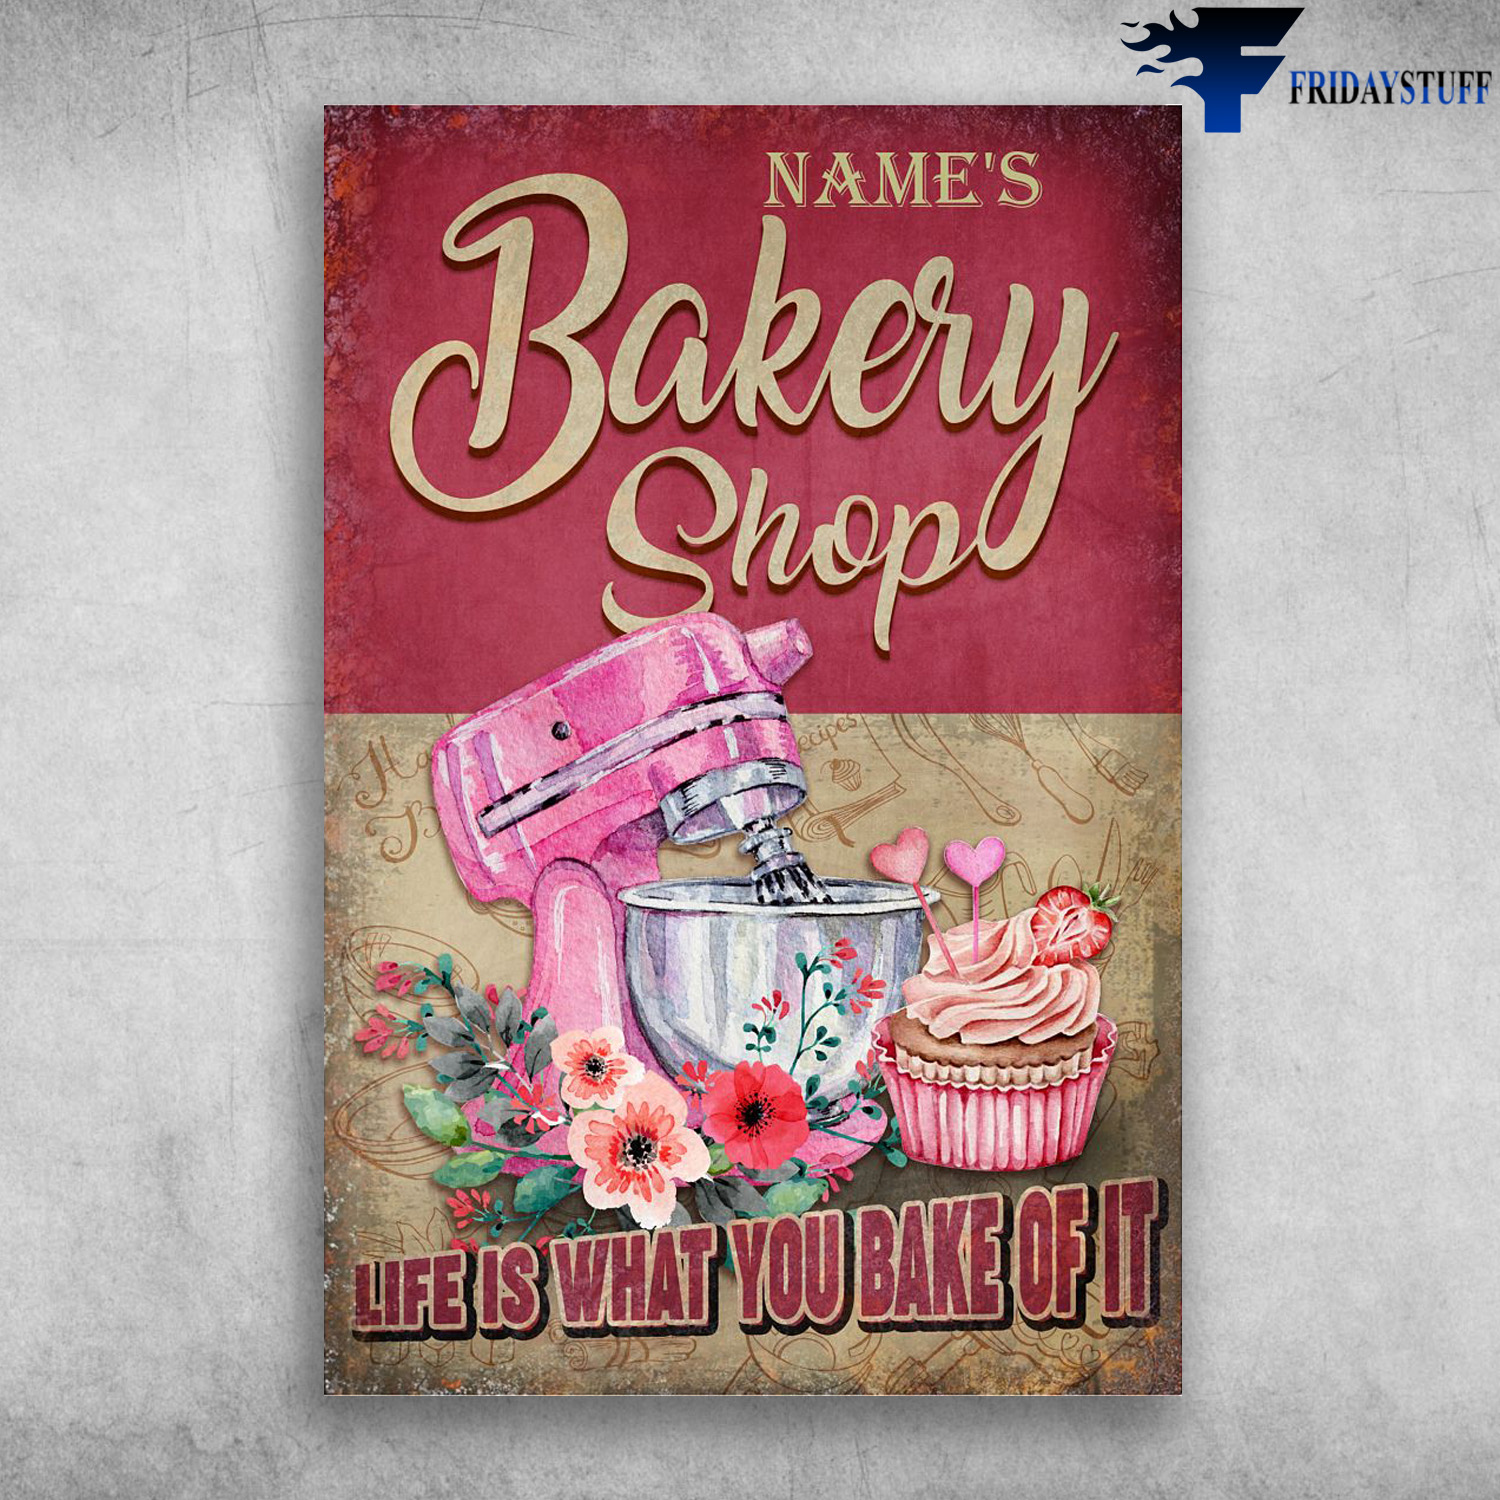 Bakery Shop - Name's Bakery Shop, Life Is What You Bake Of It